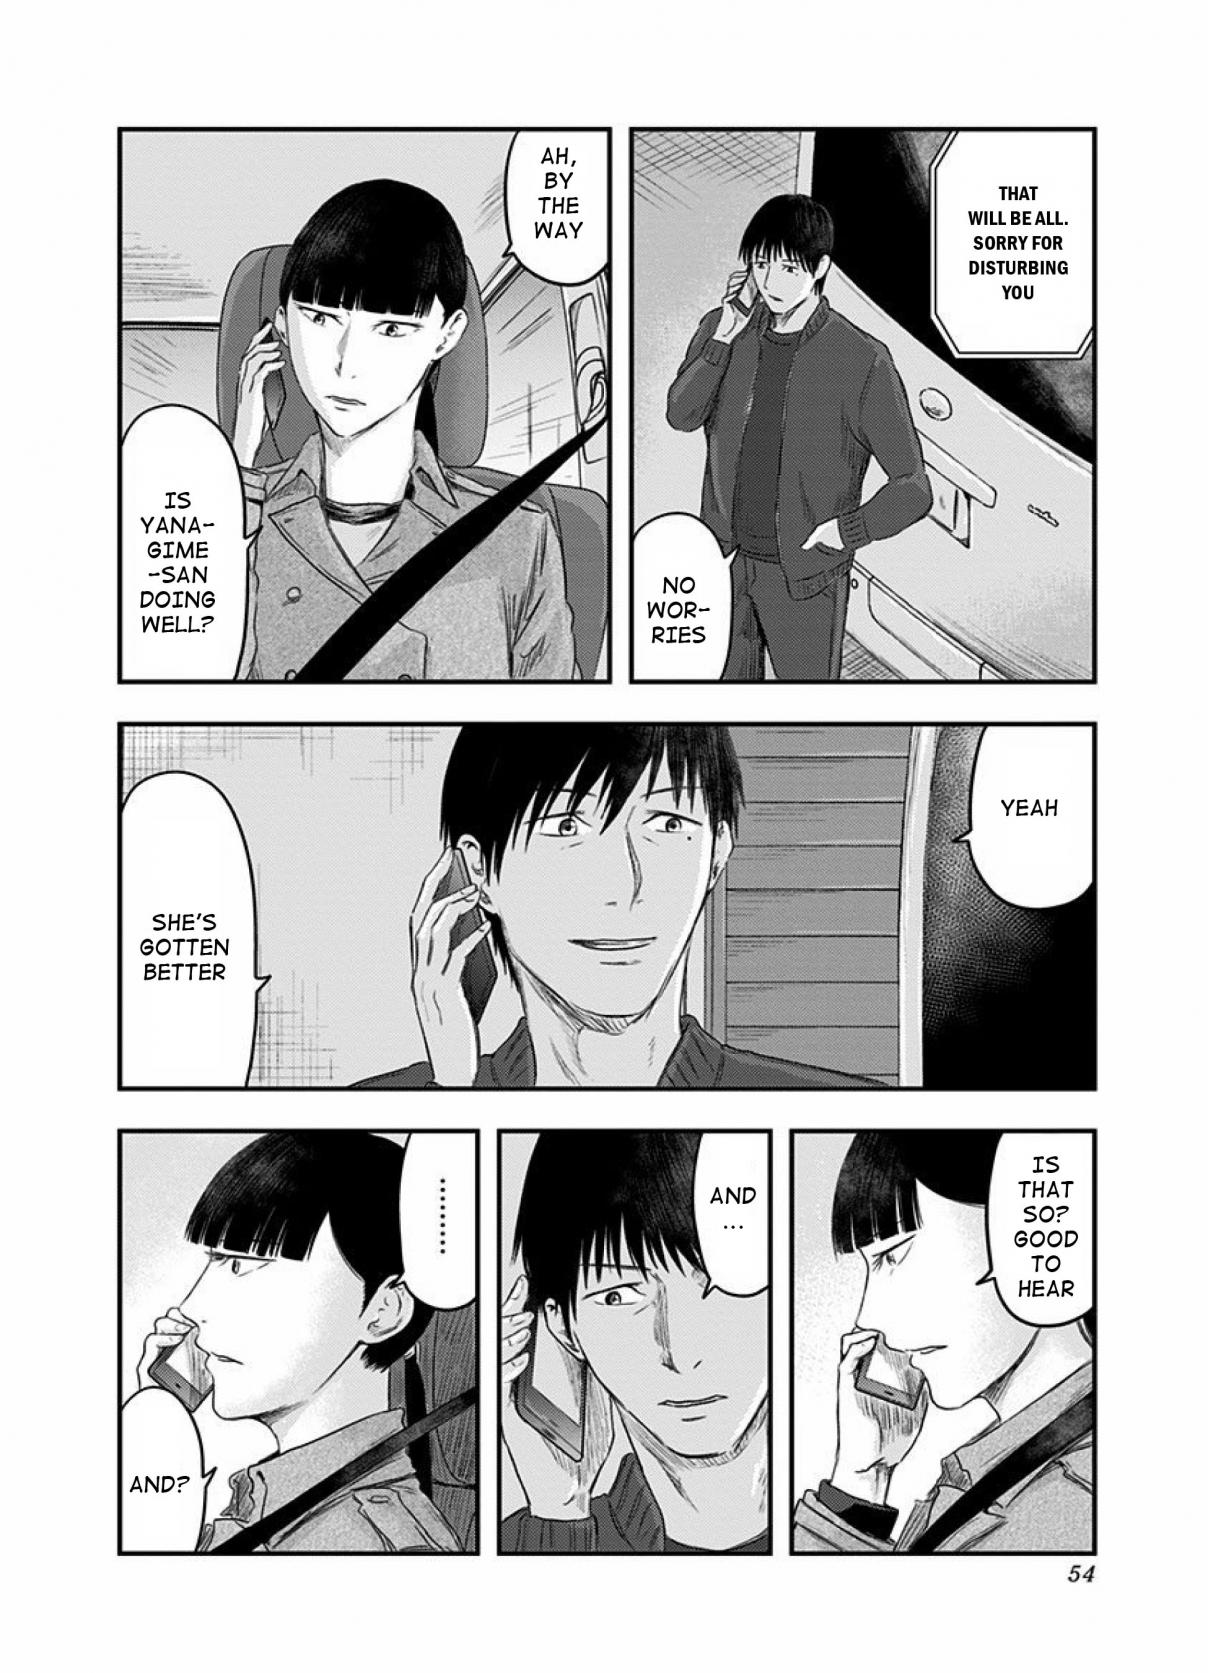 Route End Vol. 5 Ch. 29 Thereafter